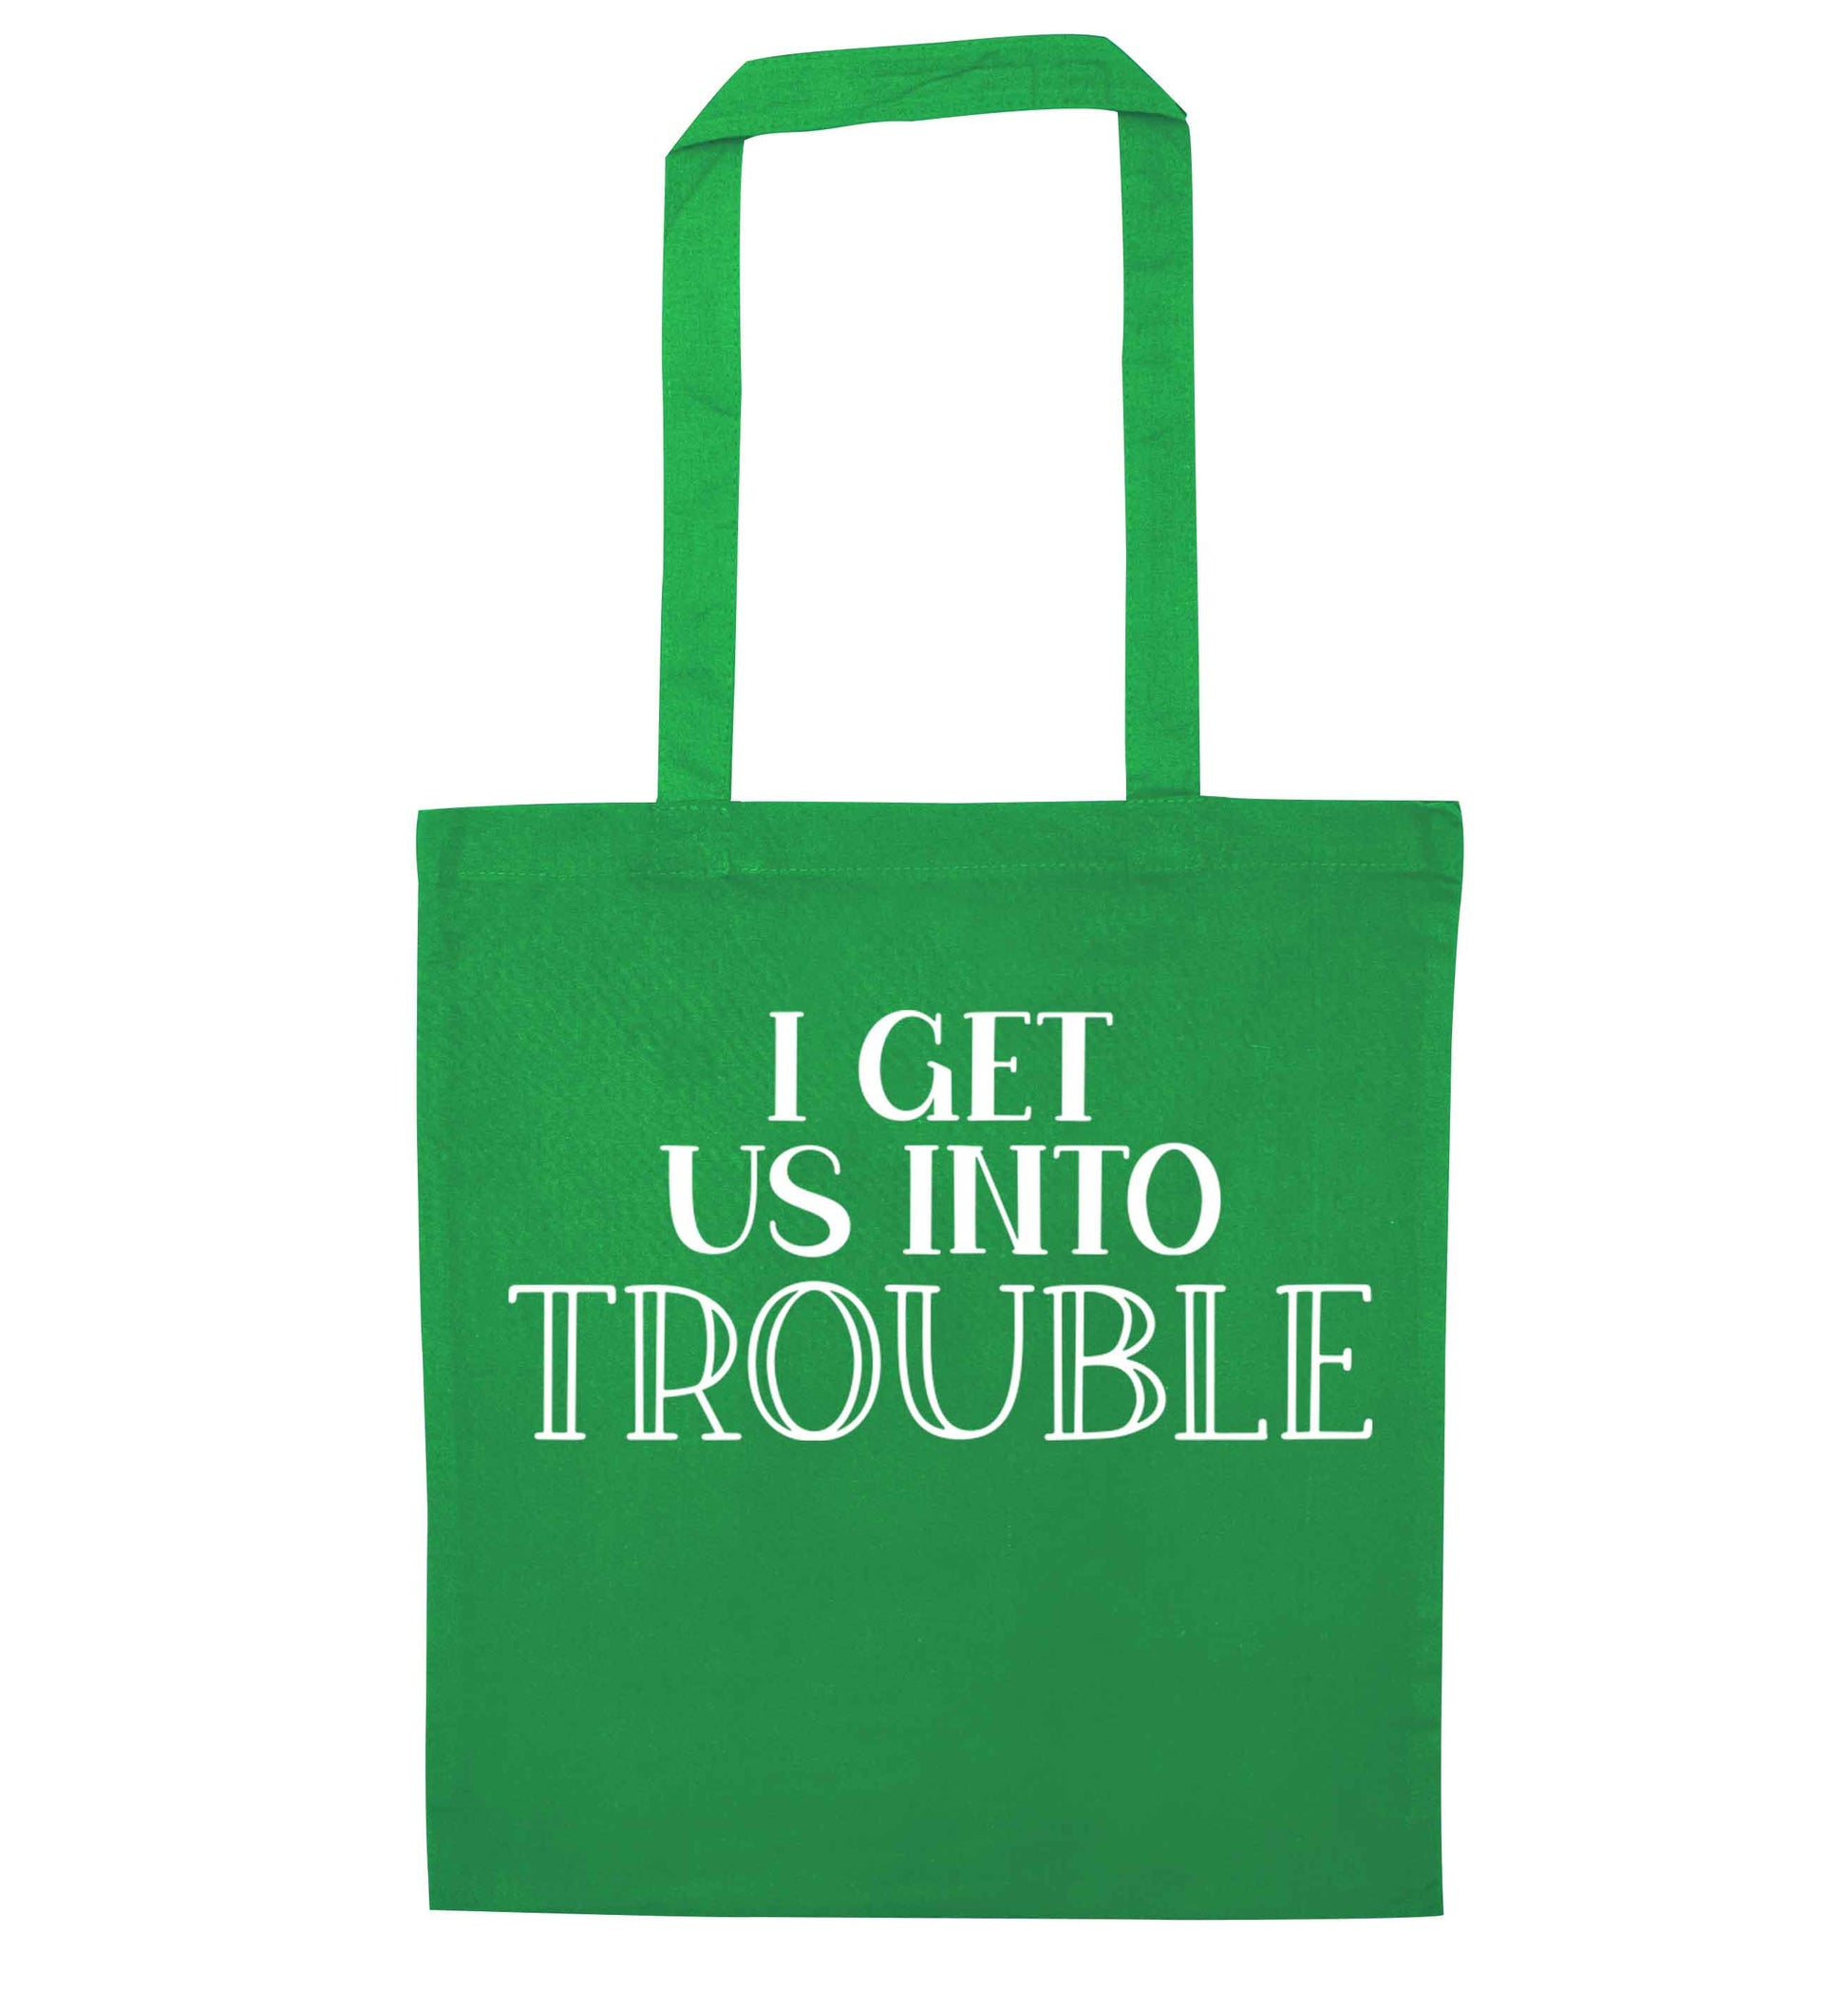 I get us into trouble green tote bag